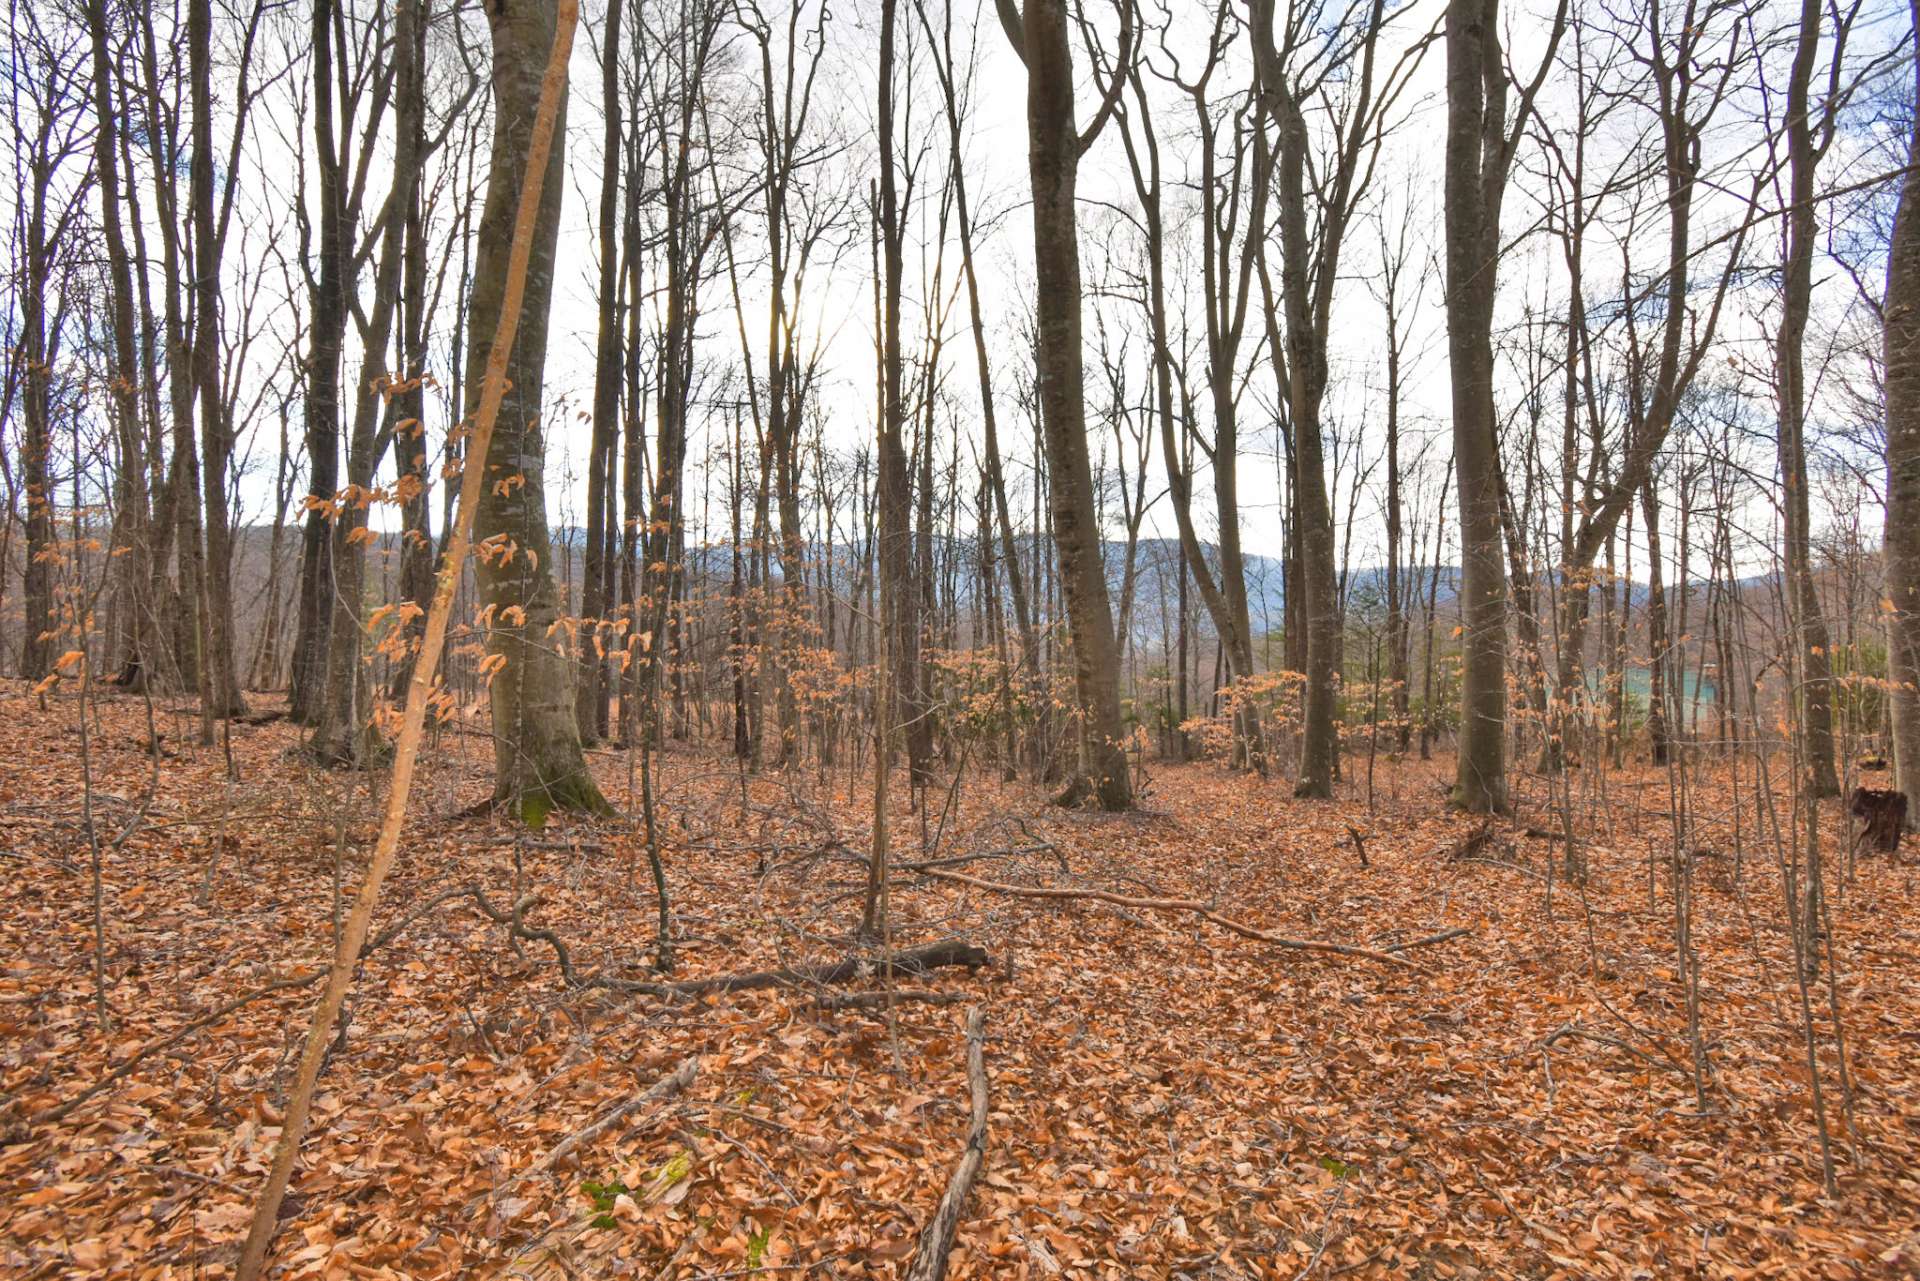 Bordered by the Jefferson National Forest along the entire back of the property and located close to Grayson Highlands Park, Mount Rogers and Whitetop, Virginia's highest points, makes this tract quite a package and ideal for investment, development or a private mountain estate.